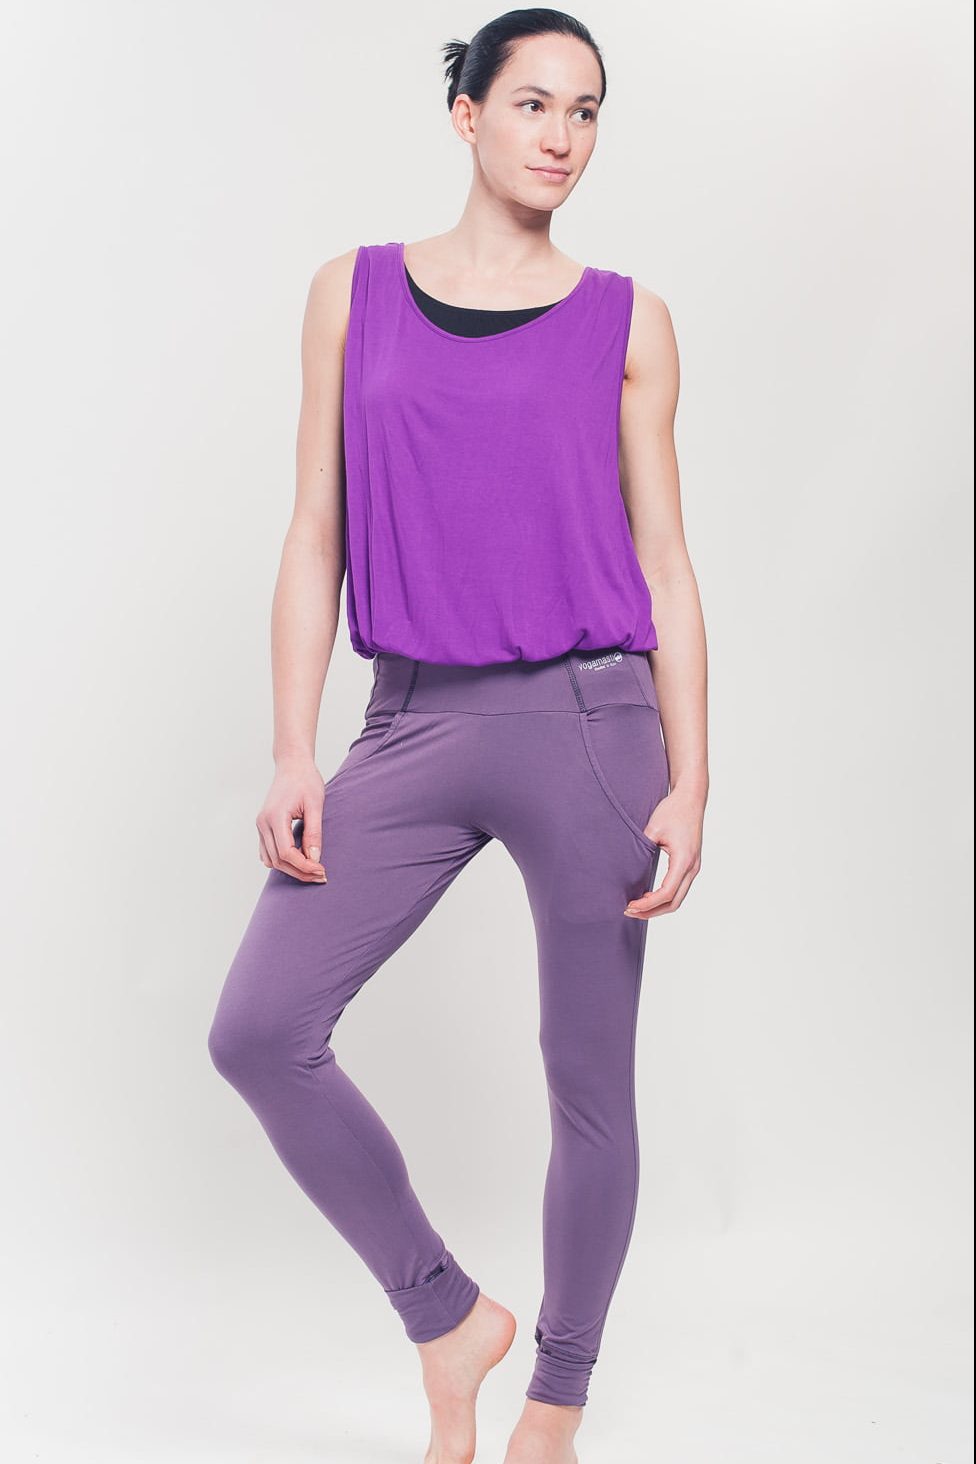 Easy Fit Yoga leggings with pockets on a model showing the front view. They are a soft lavender colour and full length